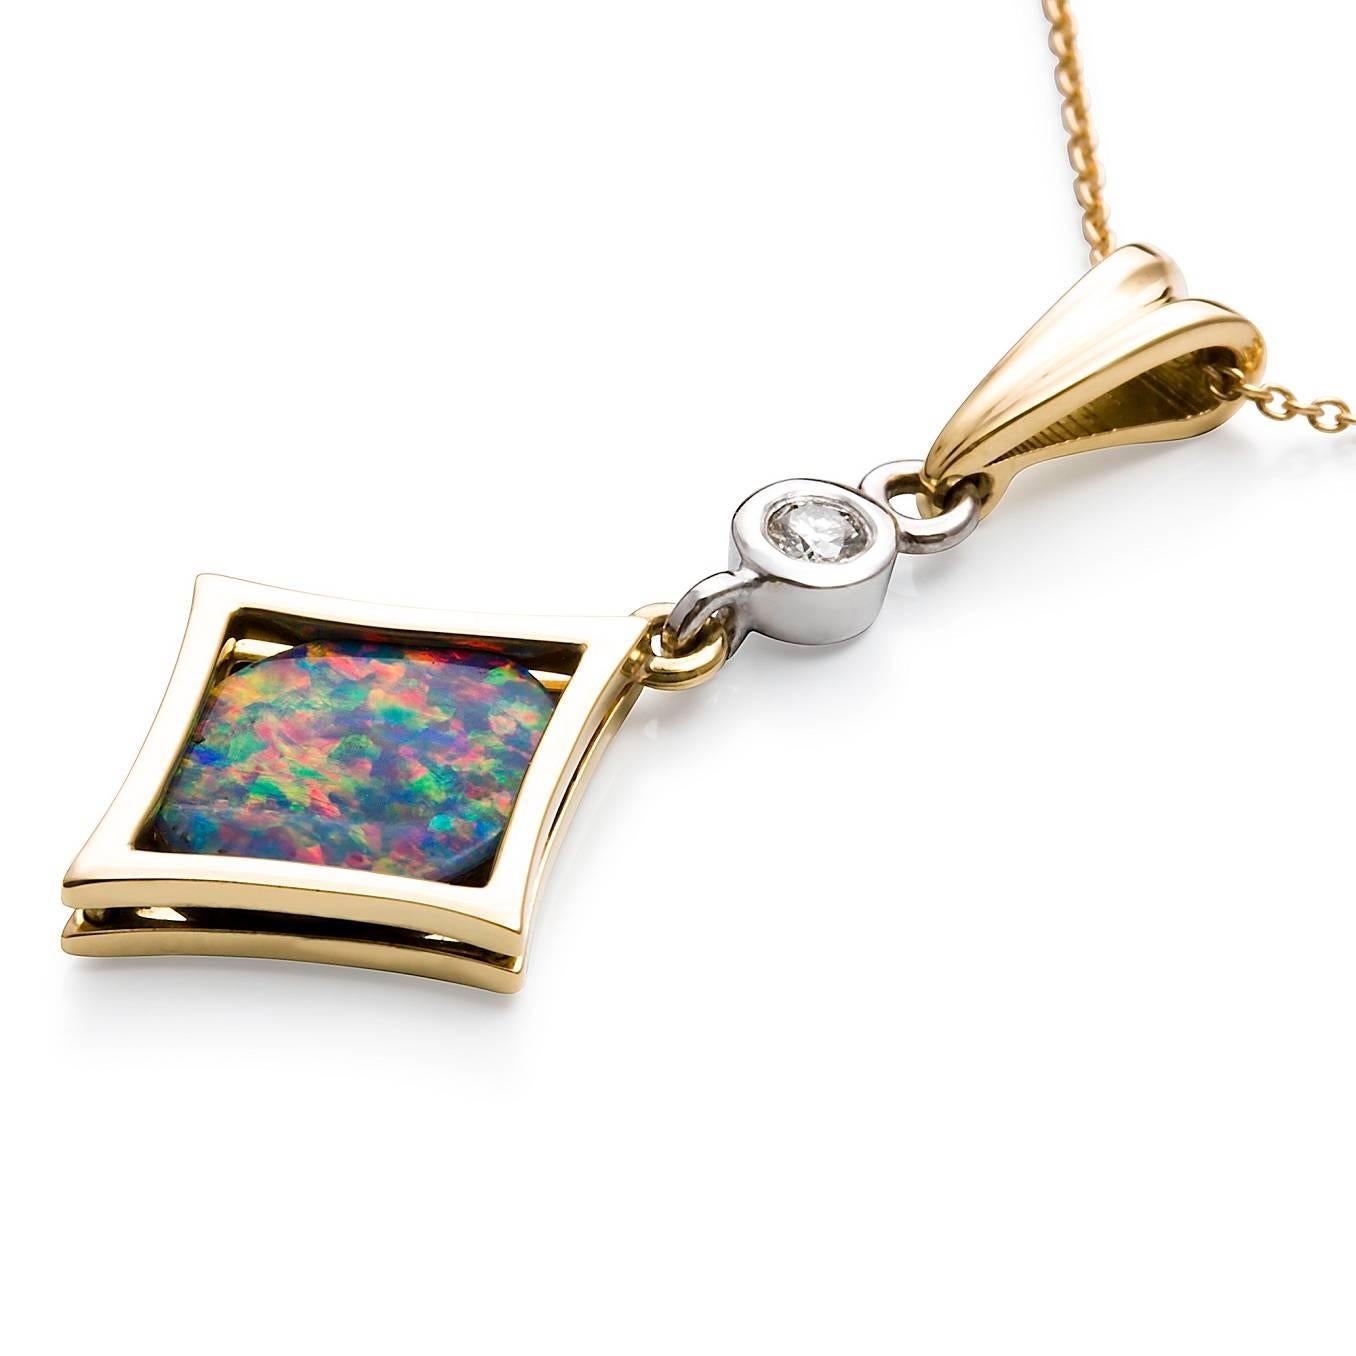 Opale & Diamante Necklace

This stunning opal doublet is encased within a lovely 18ct yellow gold diamond-shaped pendant, which is suspended below an 18ct white gold chenier set diamond with fancy triangular bail and 18ct yellow gold trace